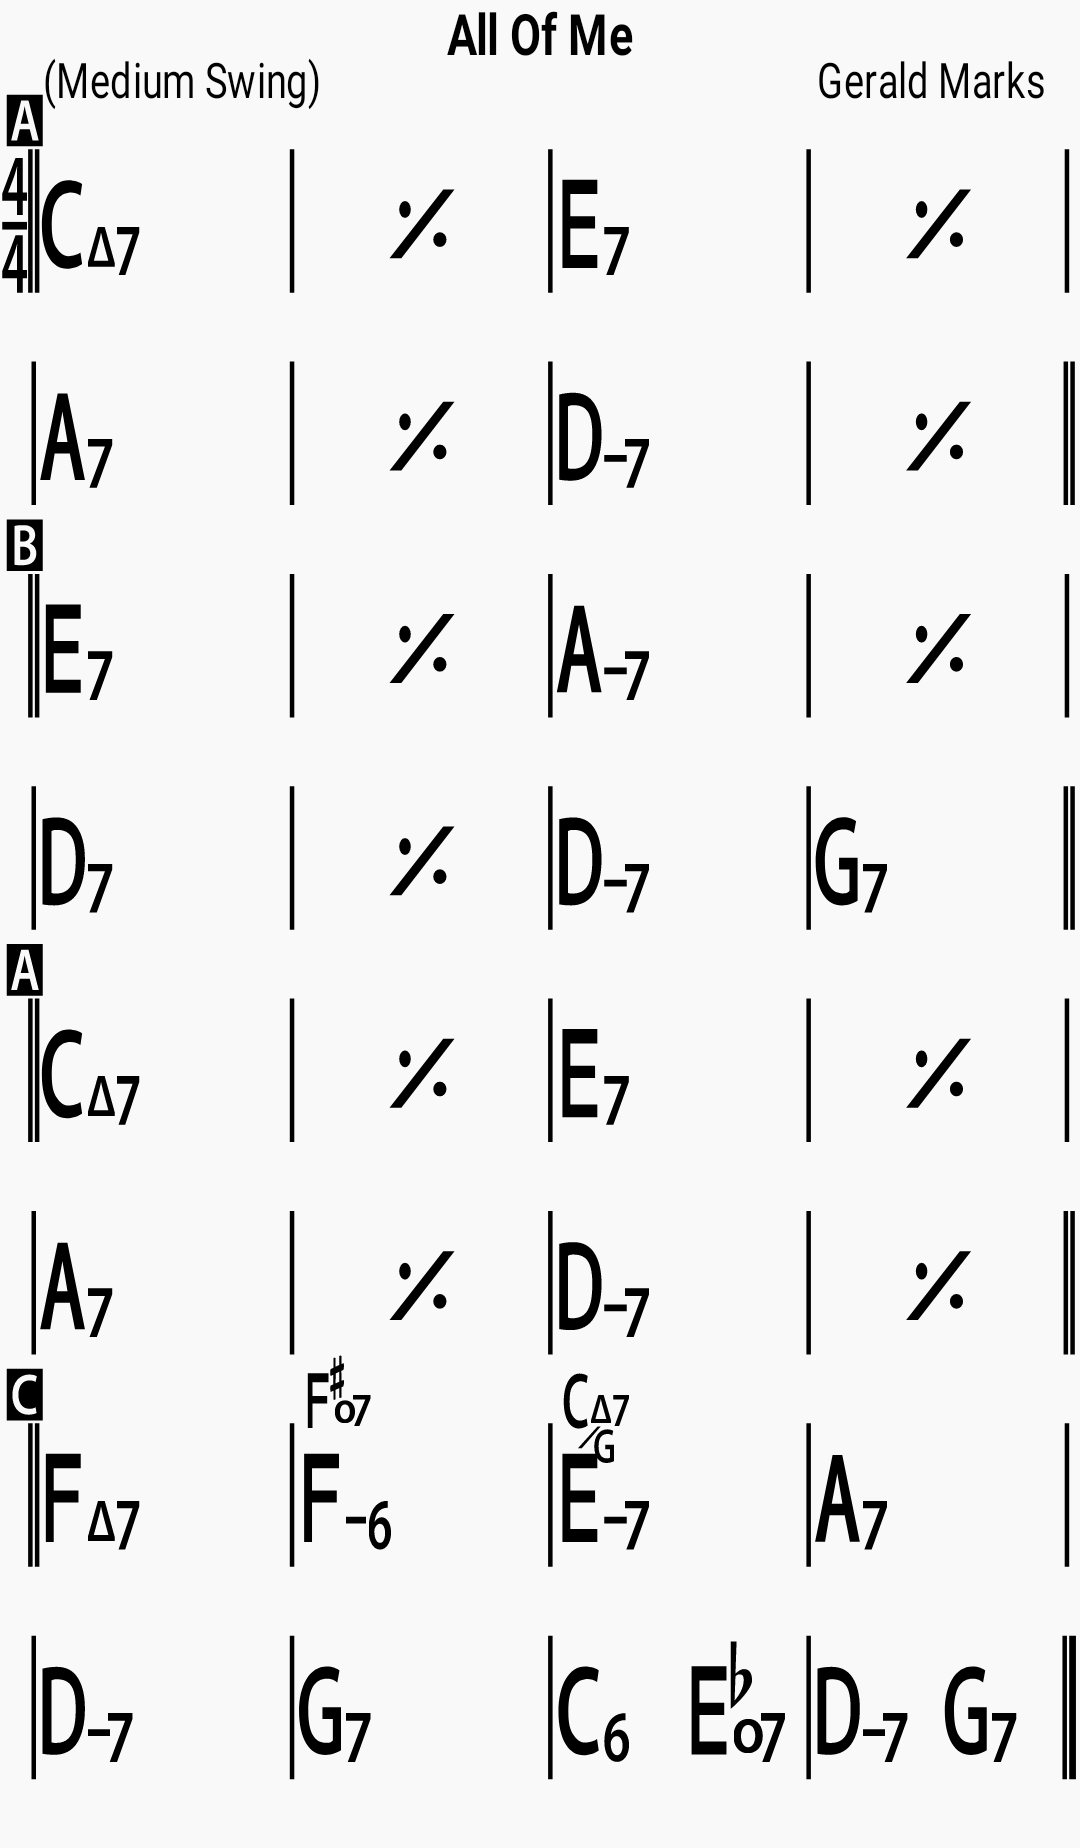 Chord chart for the jazz standard All Of Me